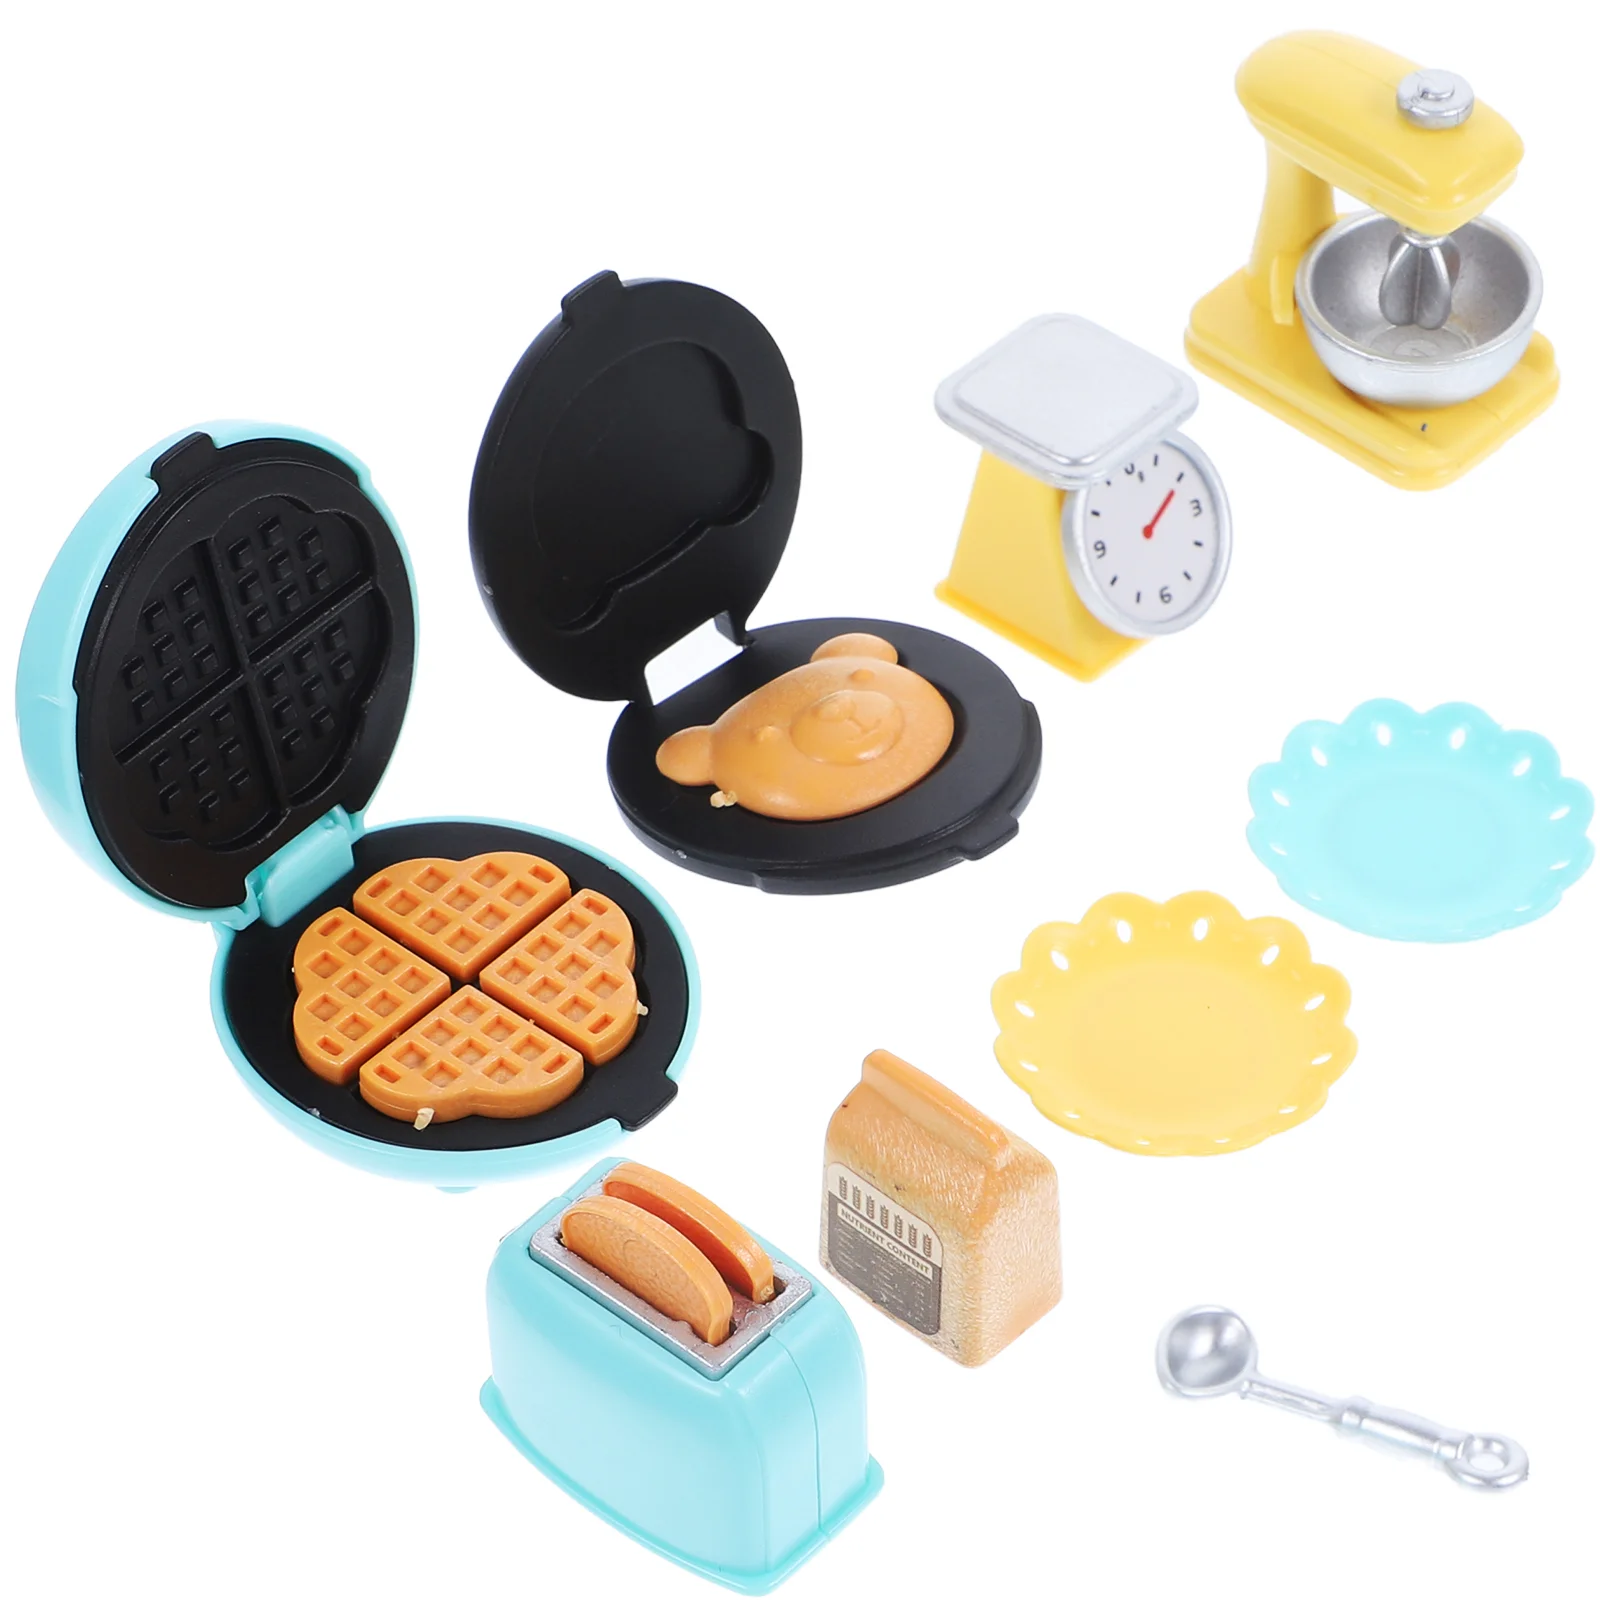 

Dollhouse Cooker Miniature Kit Toy Layout Accessory Simulated Kitchenware DIY Baking Toys